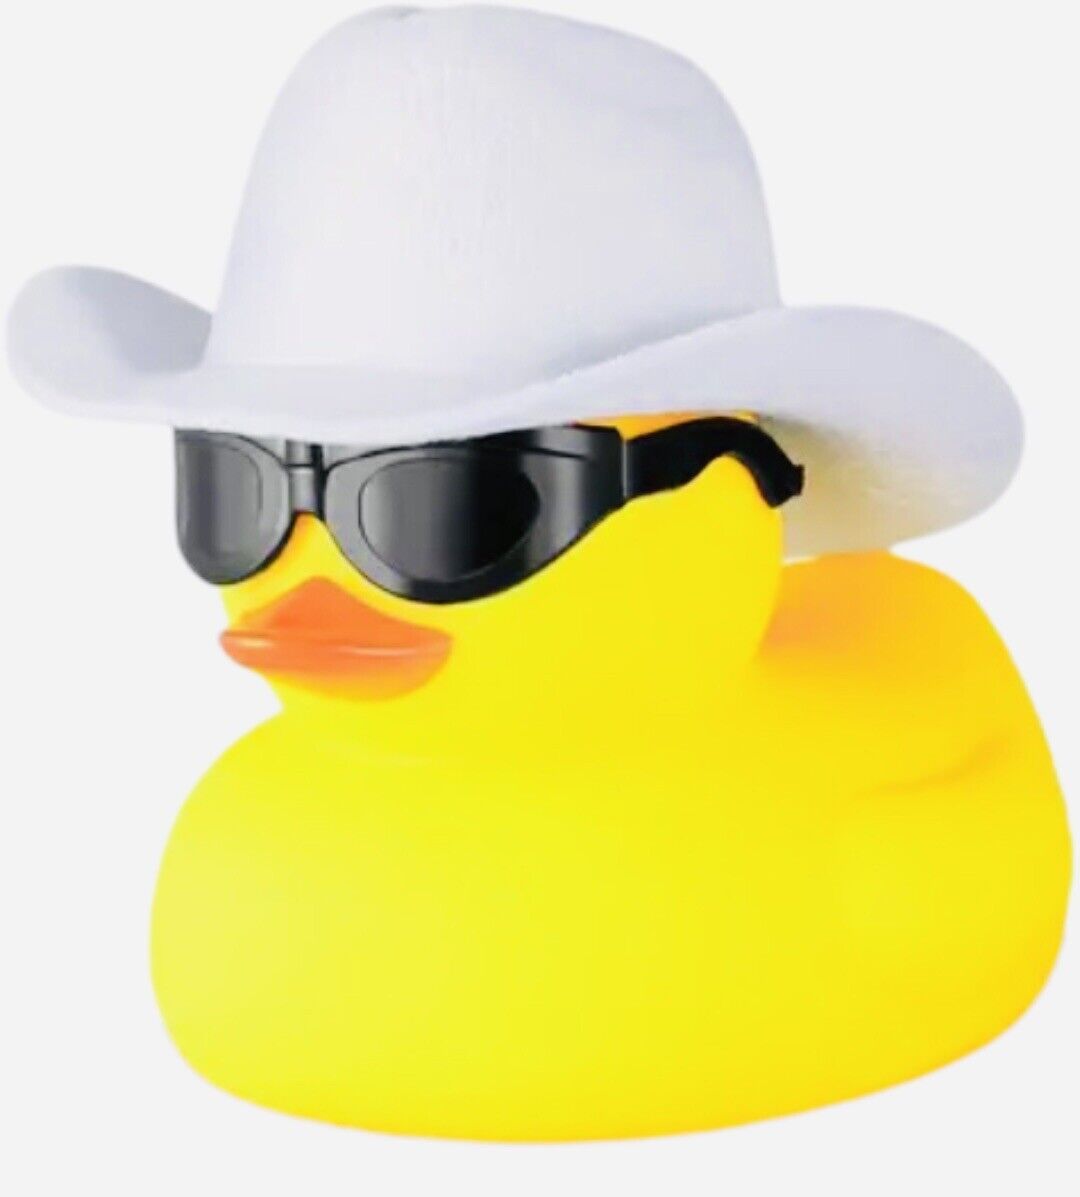 Large Cowboy Rubber Duck with Cowboy Hat & Sunglasses, Collectible Yellow Duck